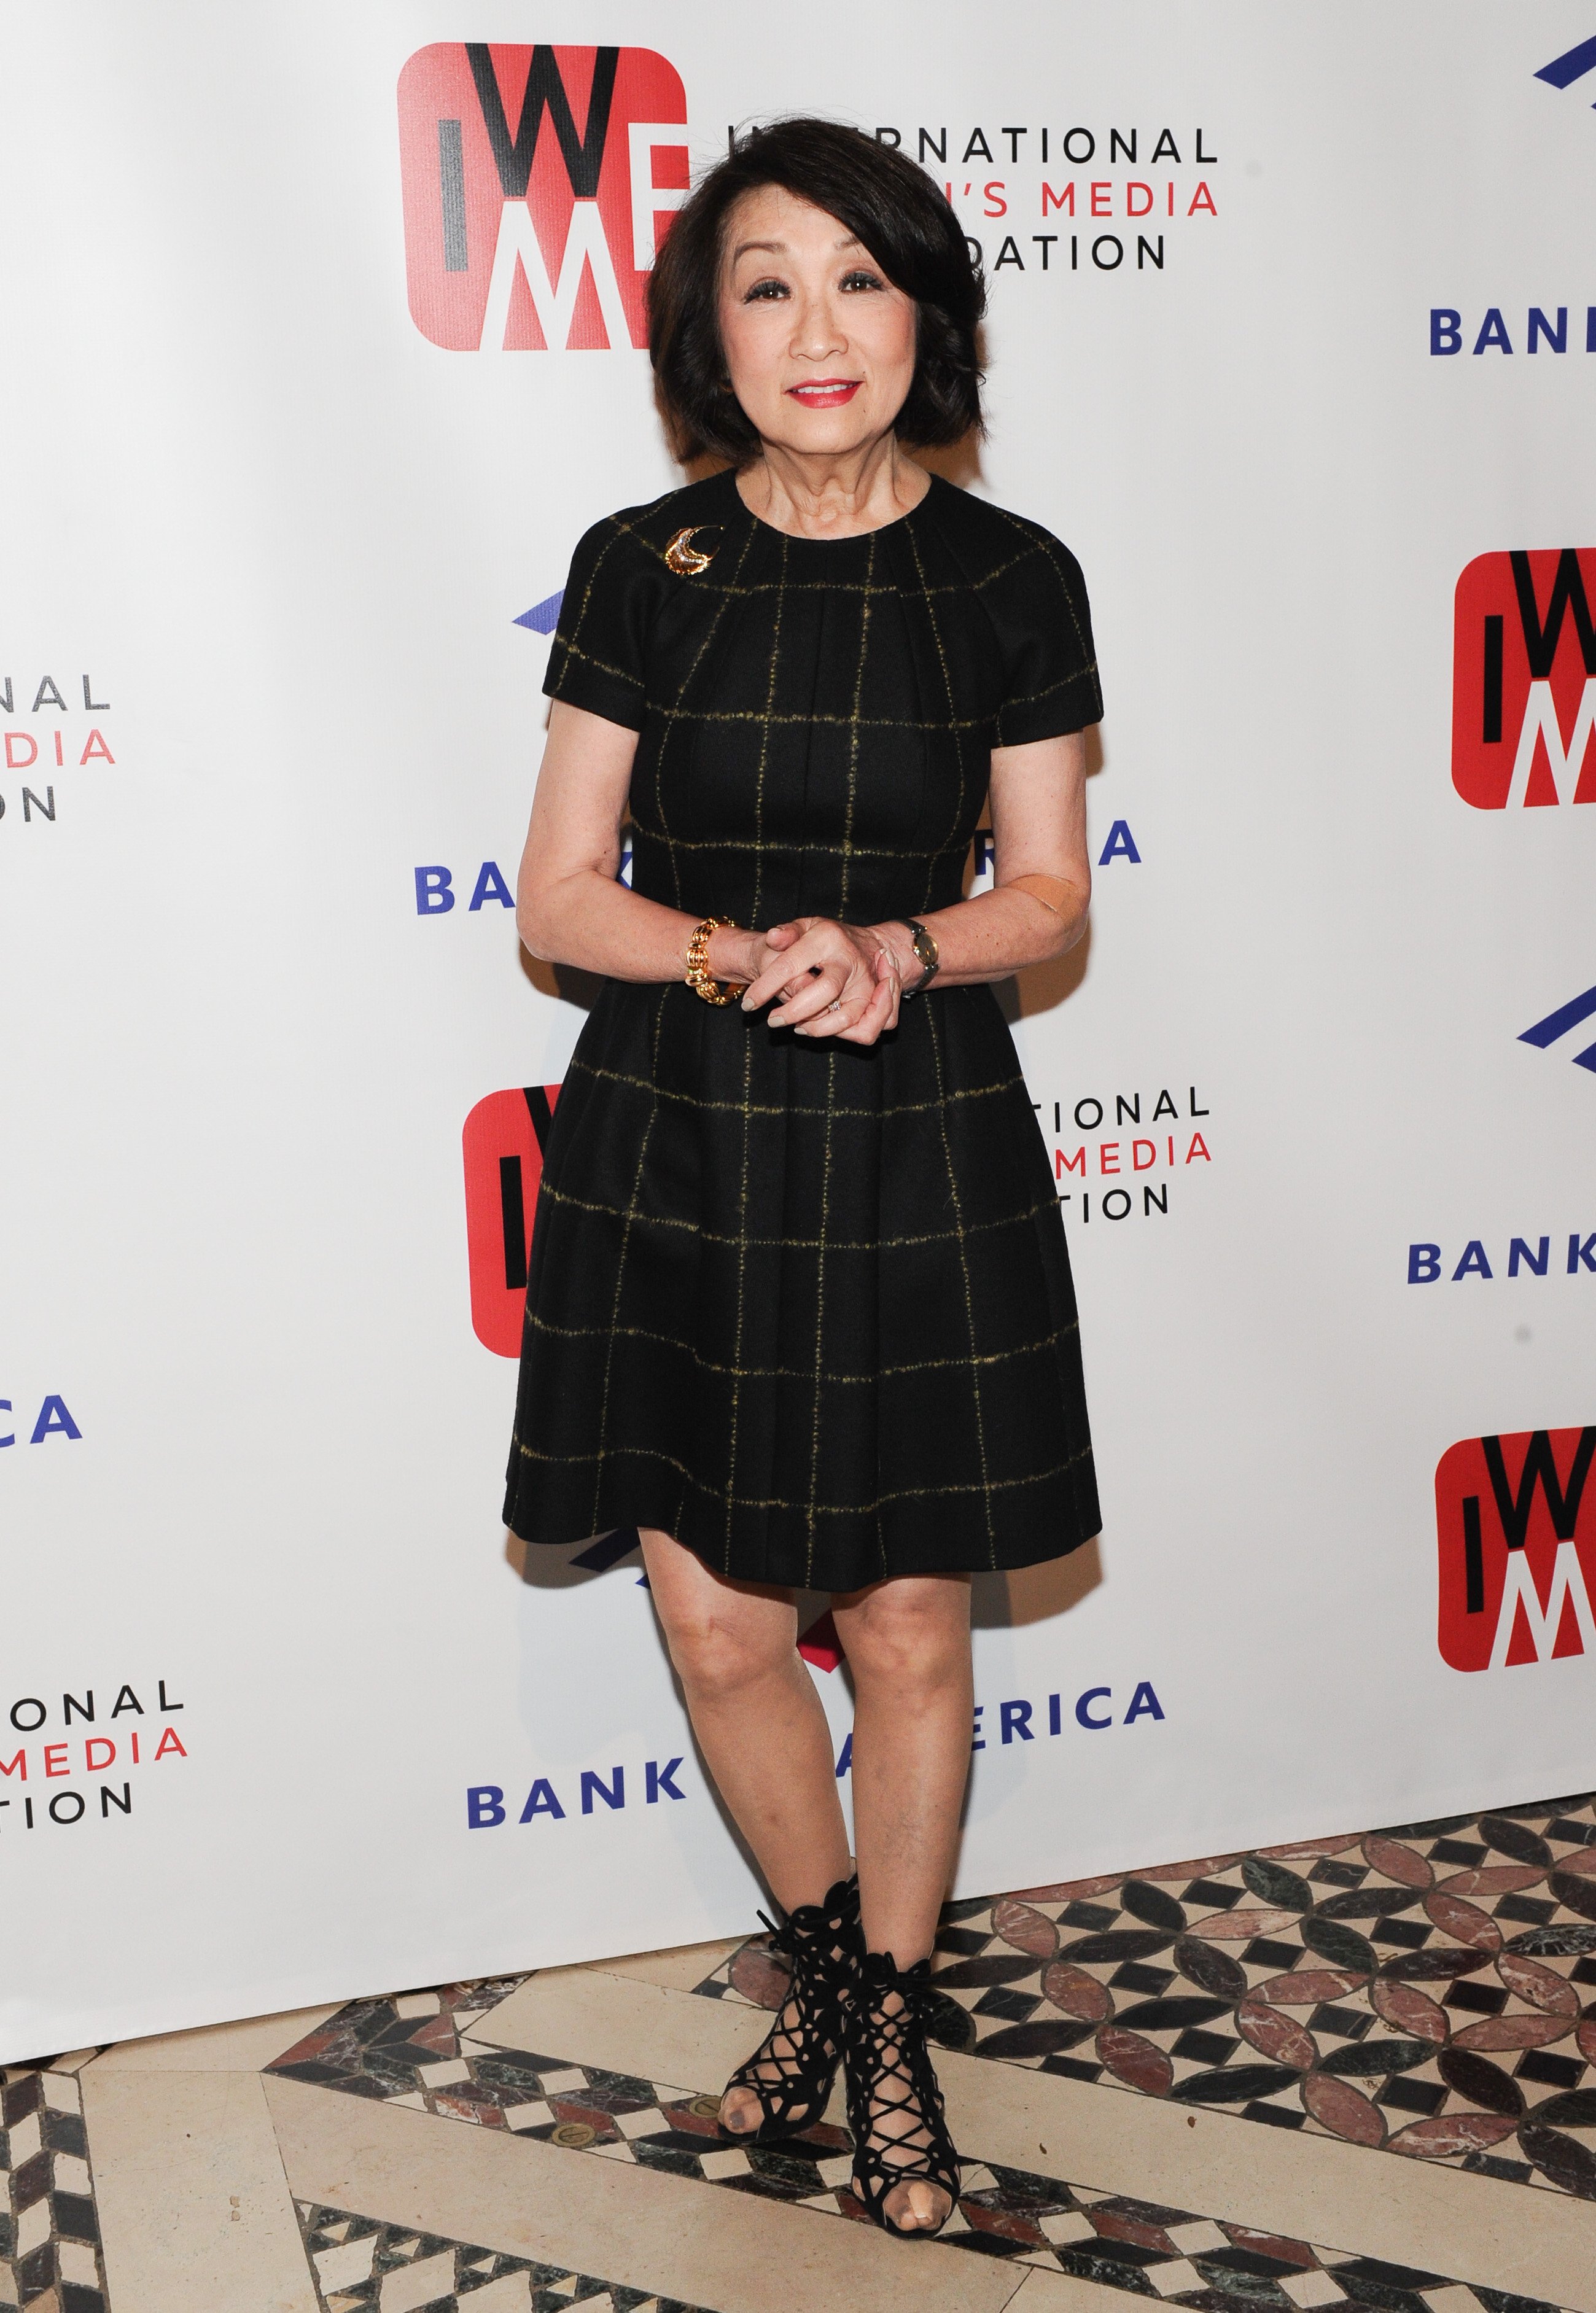 Connie Chung at The International Women's Media Foundation's 2019 Courage in Journalism Awards | Photo: Getty Images